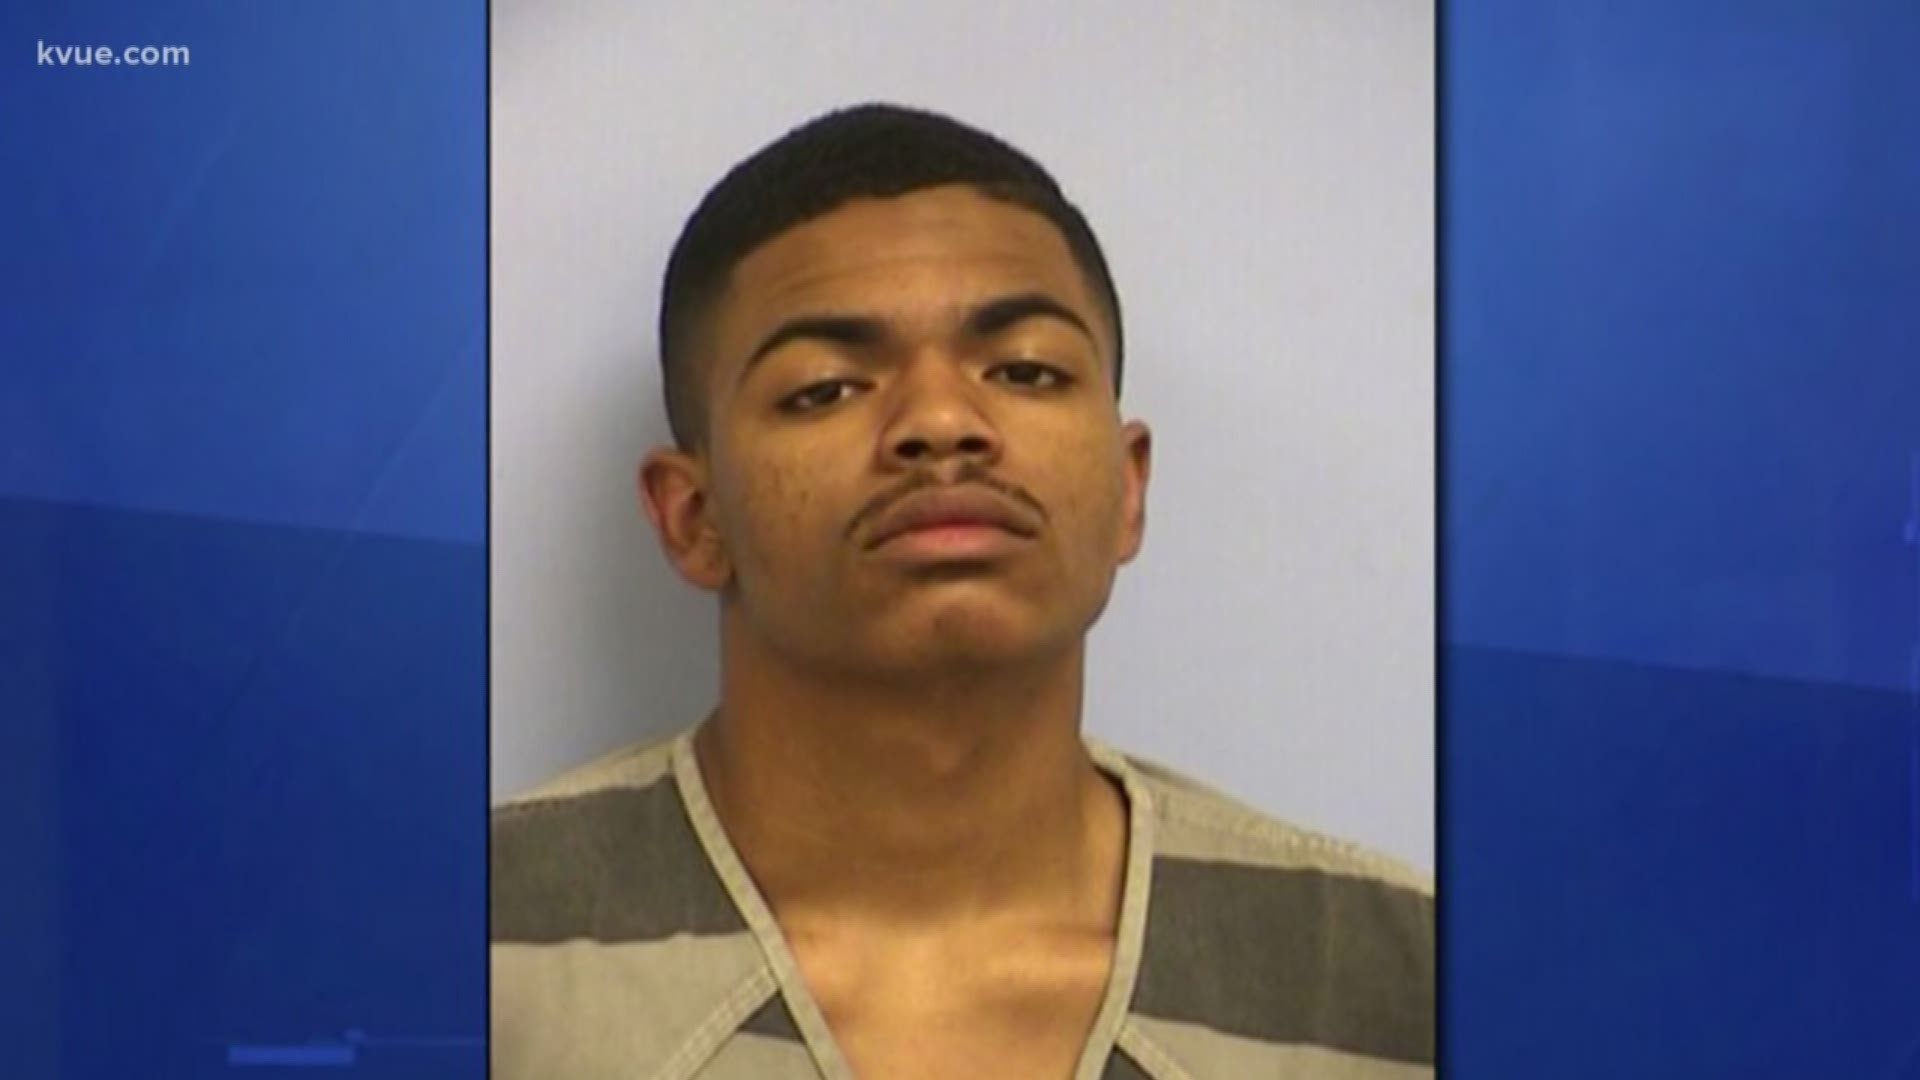 An Austin man who bragged about breaking into cars and stealing guns earlier this month is in the Travis County Jail tonight. Police caught 18-year-old Cristian Daniel because his own father turned him in.